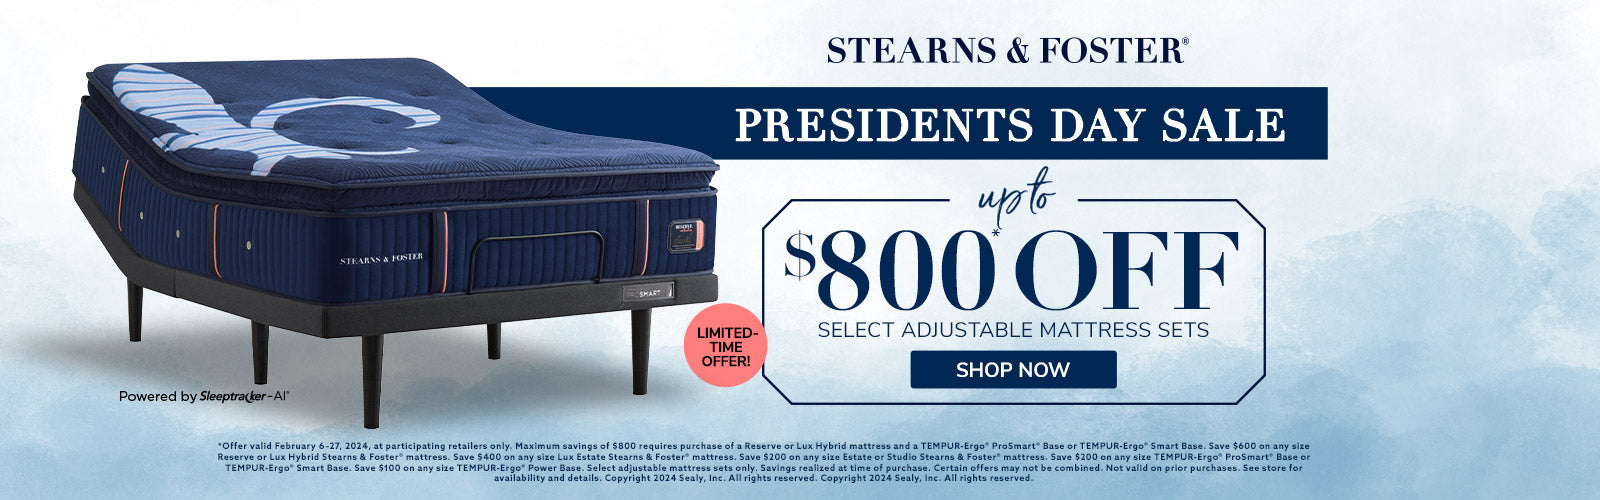 Stearns & Foster Presidents Day Sale - Save up to $800 on Select Adjustable Mattress Sets